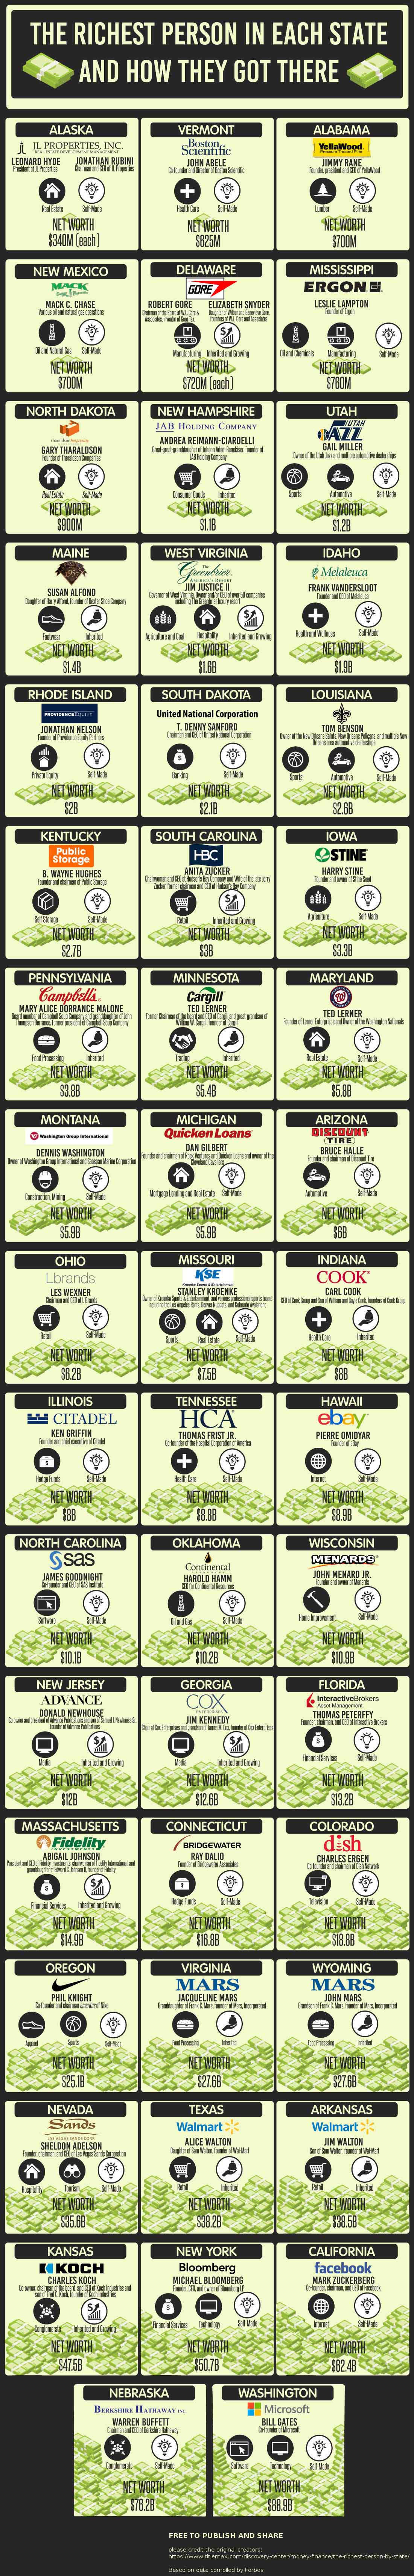 The Richest Person By State and How They Got There